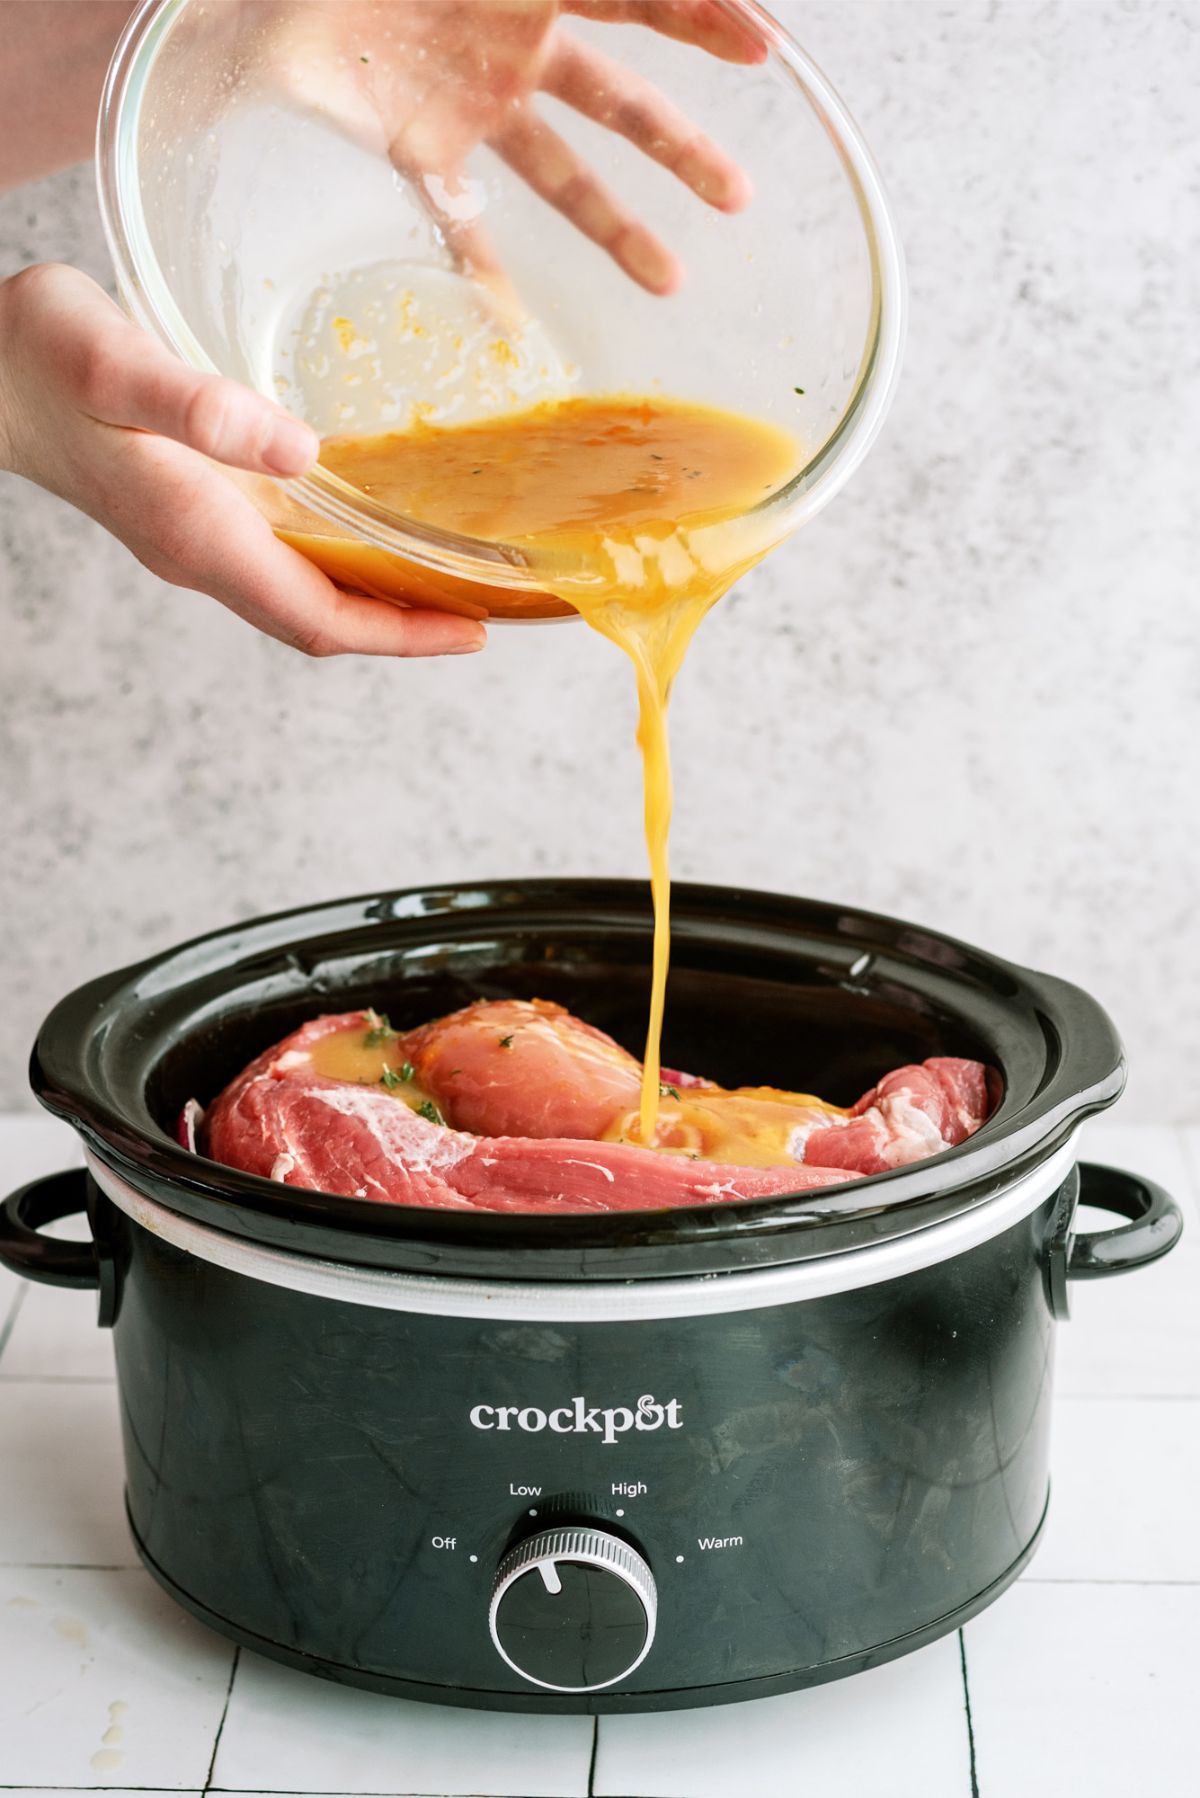 Pouring glaze over pork and veggies in the slow cooker